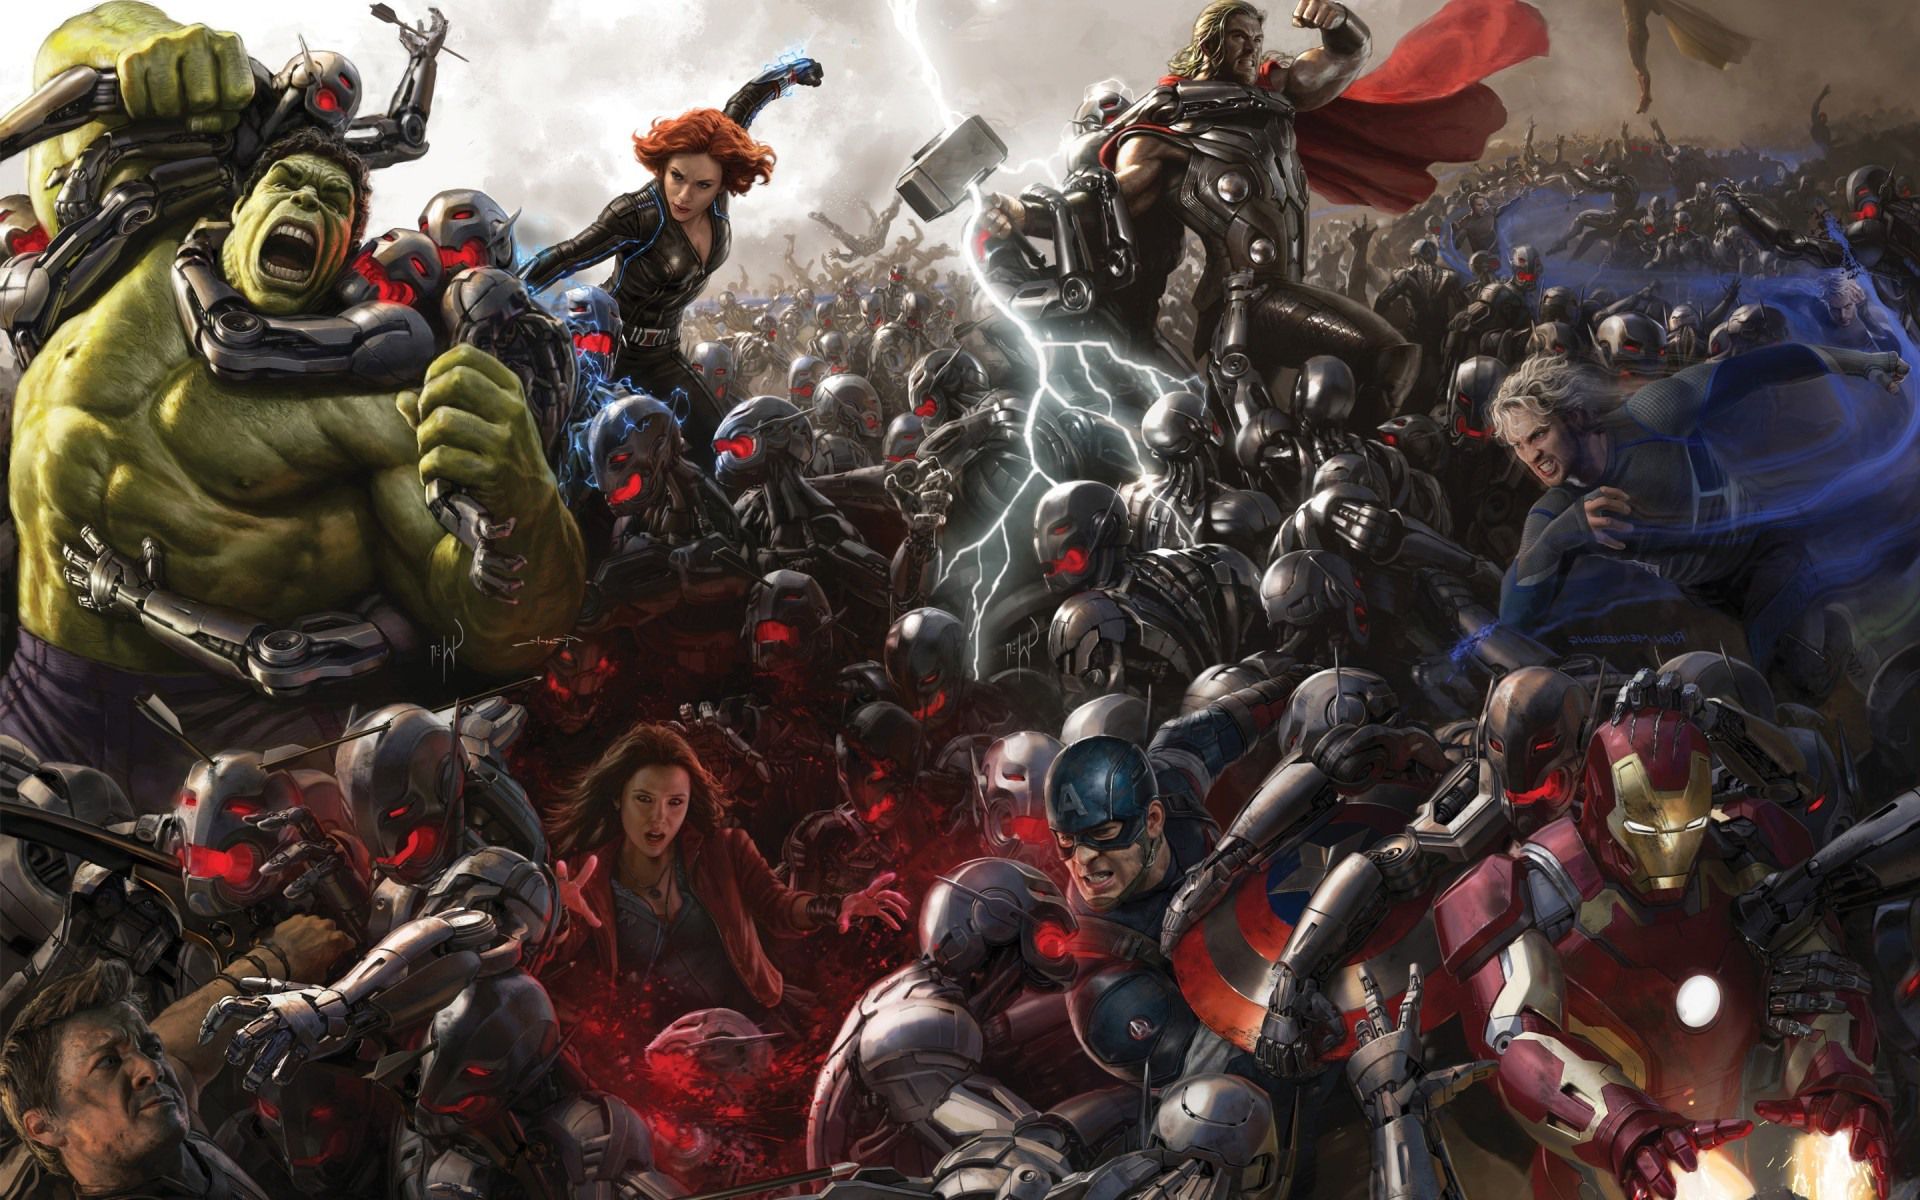  9/30/14: Age of Ultron Trailer Release Date